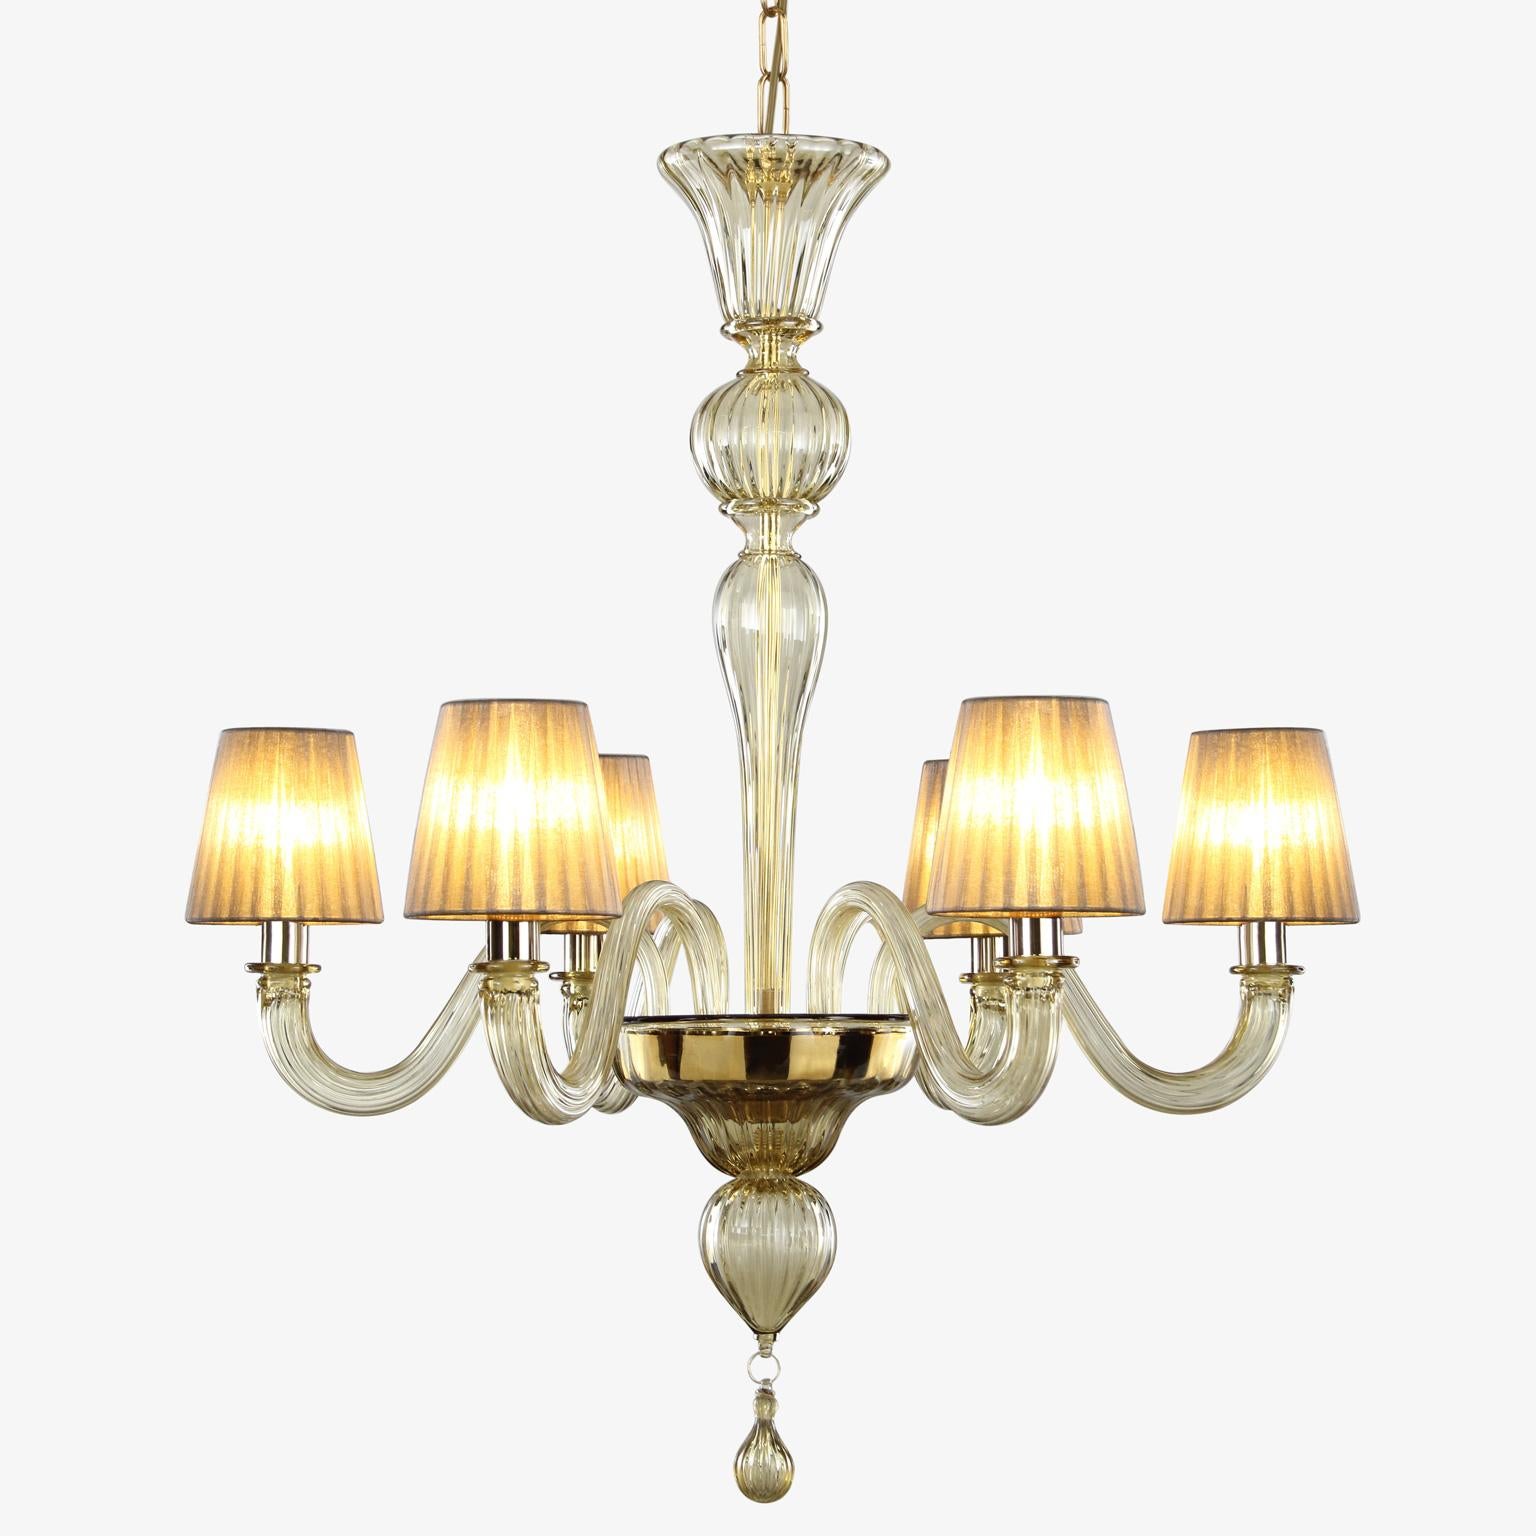 Chandelier 6 arms smoky quartz Murano glass, smoky organza Lampshades Chapeau by Multiforme
Chapeau is a classic and essential chandelier, it is handcrafted using high quality materials in Murano Glass and handmade cotton lampshades.
This Murano